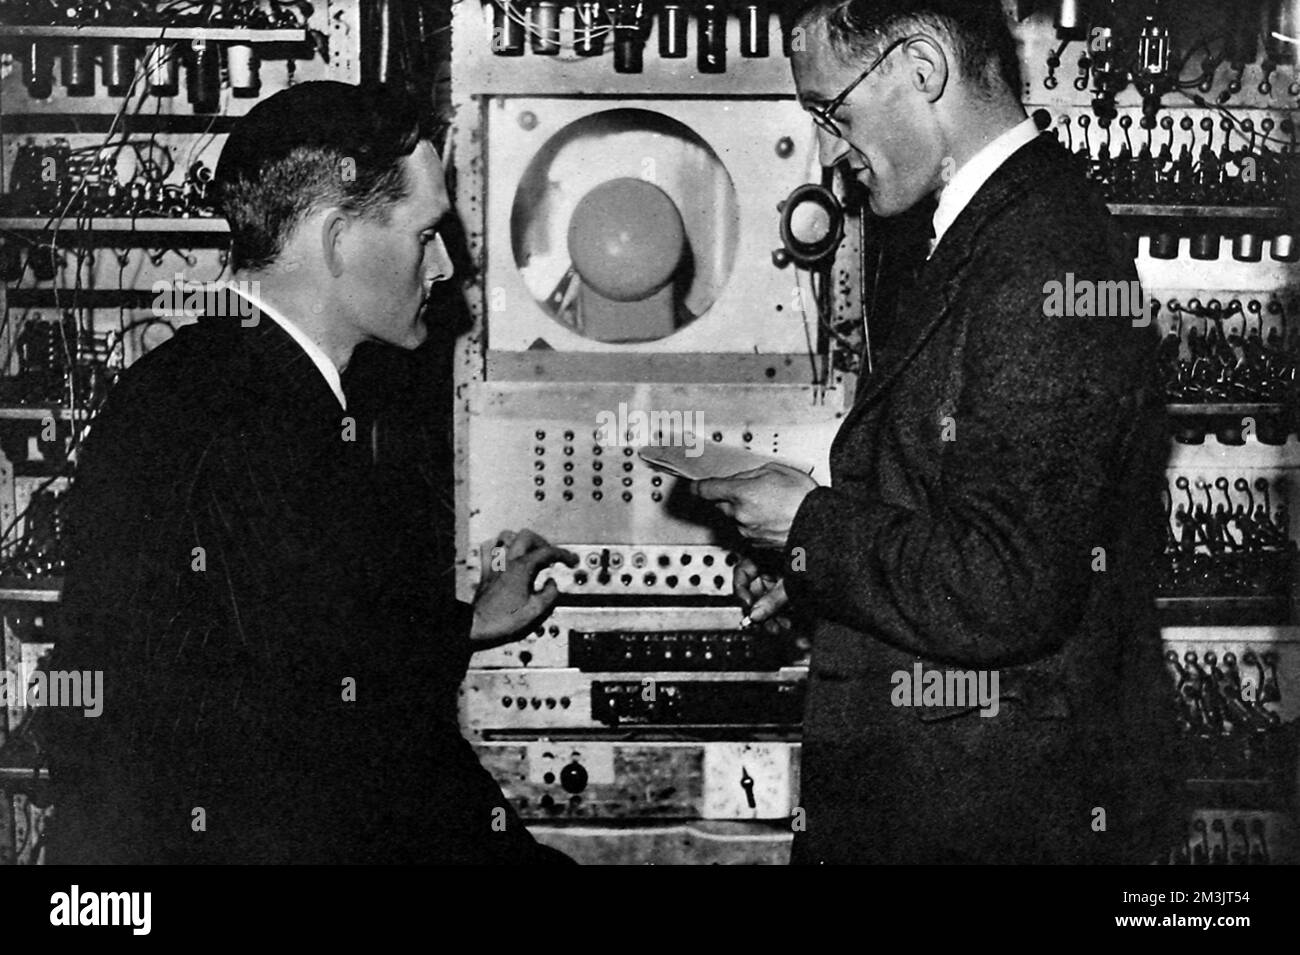 The control panel of the automatic sequence-controlled calculating machine at Manchester University; showing the monitor cathode-ray tube with Dr. T. Kilburn (left) and Professor F. C. Williams (right), inventor of the memory storage system. Williams became Professor Electrical Engineering at Manchester in 1946 is chiefly known for his development of the Williams tube, the first successful electrostatic random access memory for the digital computer. This enabled him, along with Kilburn, to operate the world's first stored-program computer in June 1948.  1949 Stock Photo